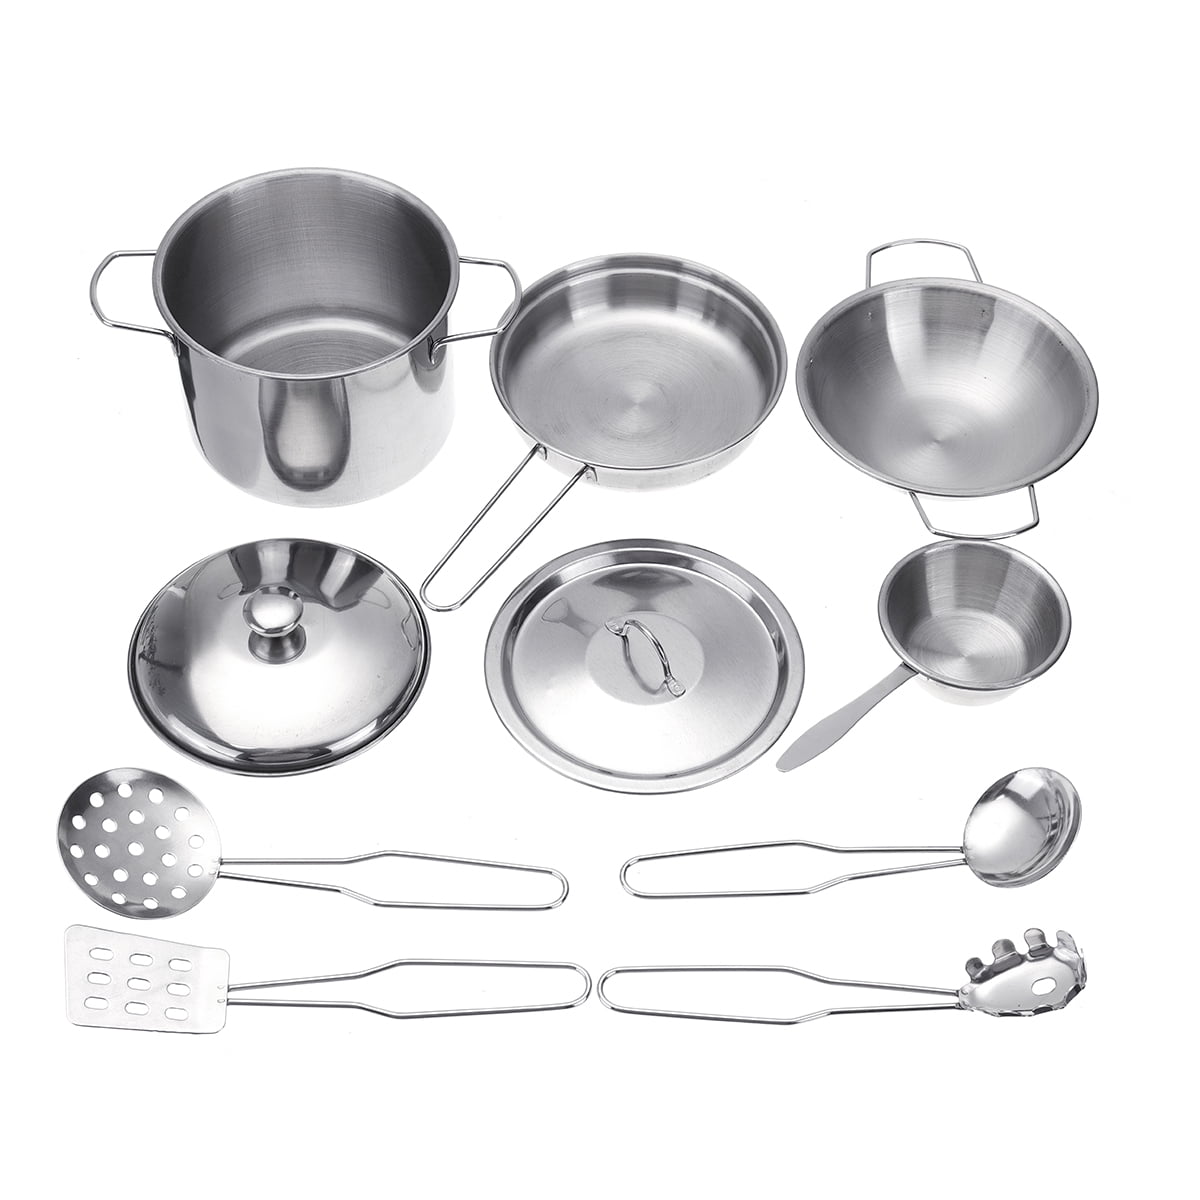 25pcs Stainless Steel Kitchen Toys Cookware Kitchen Cooking Set Pots & Pans  Toy For Children Play House Toys, Simulation Kitchen Utensils Educational  ...